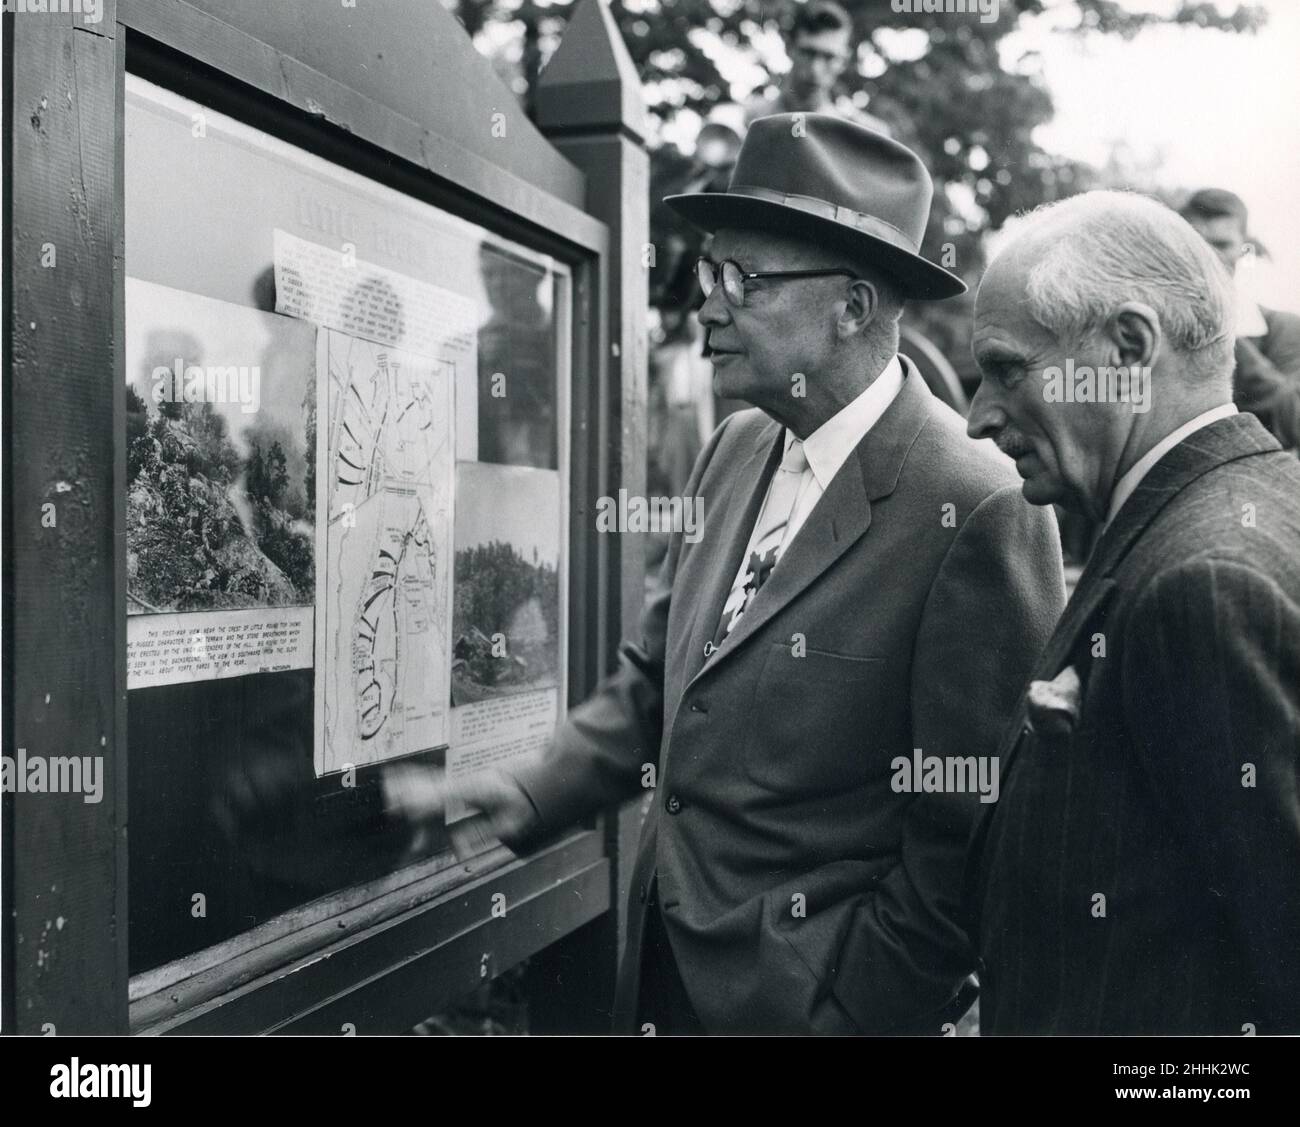 Gettysburg, PA, May 12, 1957 -- President Eisenhower and Field Marshal Bernard Montgomery visit the Gettysburg Battlefield near the President's home. The two study a kiosk showing maps of the battle. Photo: Abbie Rowe Stock Photo